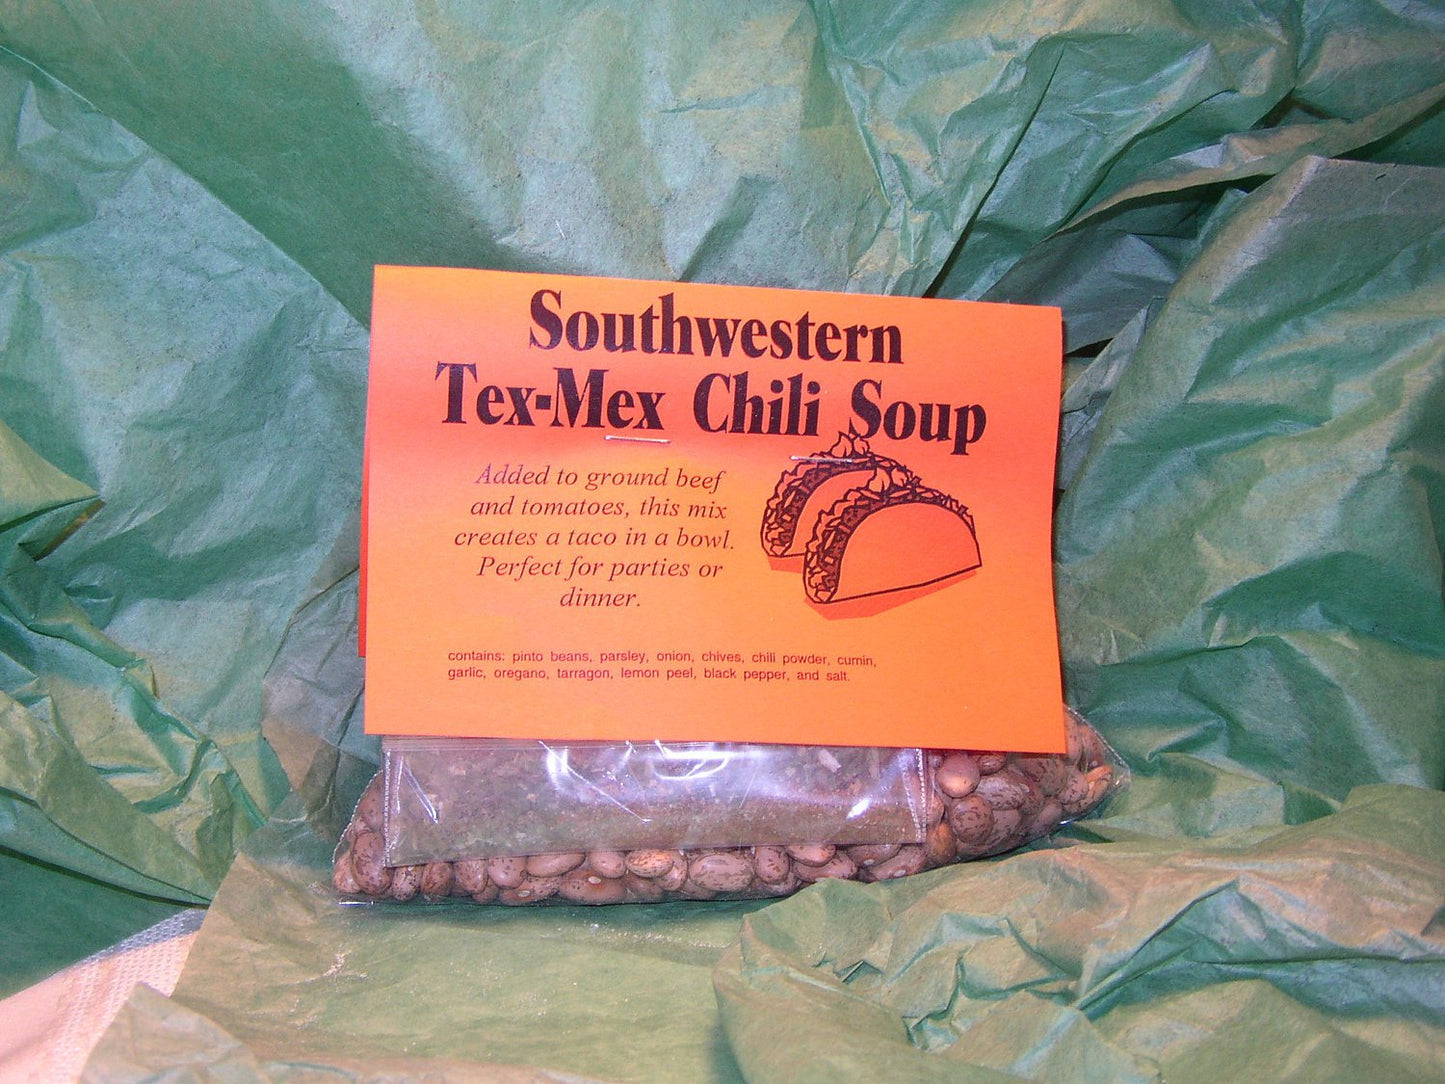 Southwest Tex Mex Chili Soup Mix, Gourmet Soup at home, dry mix